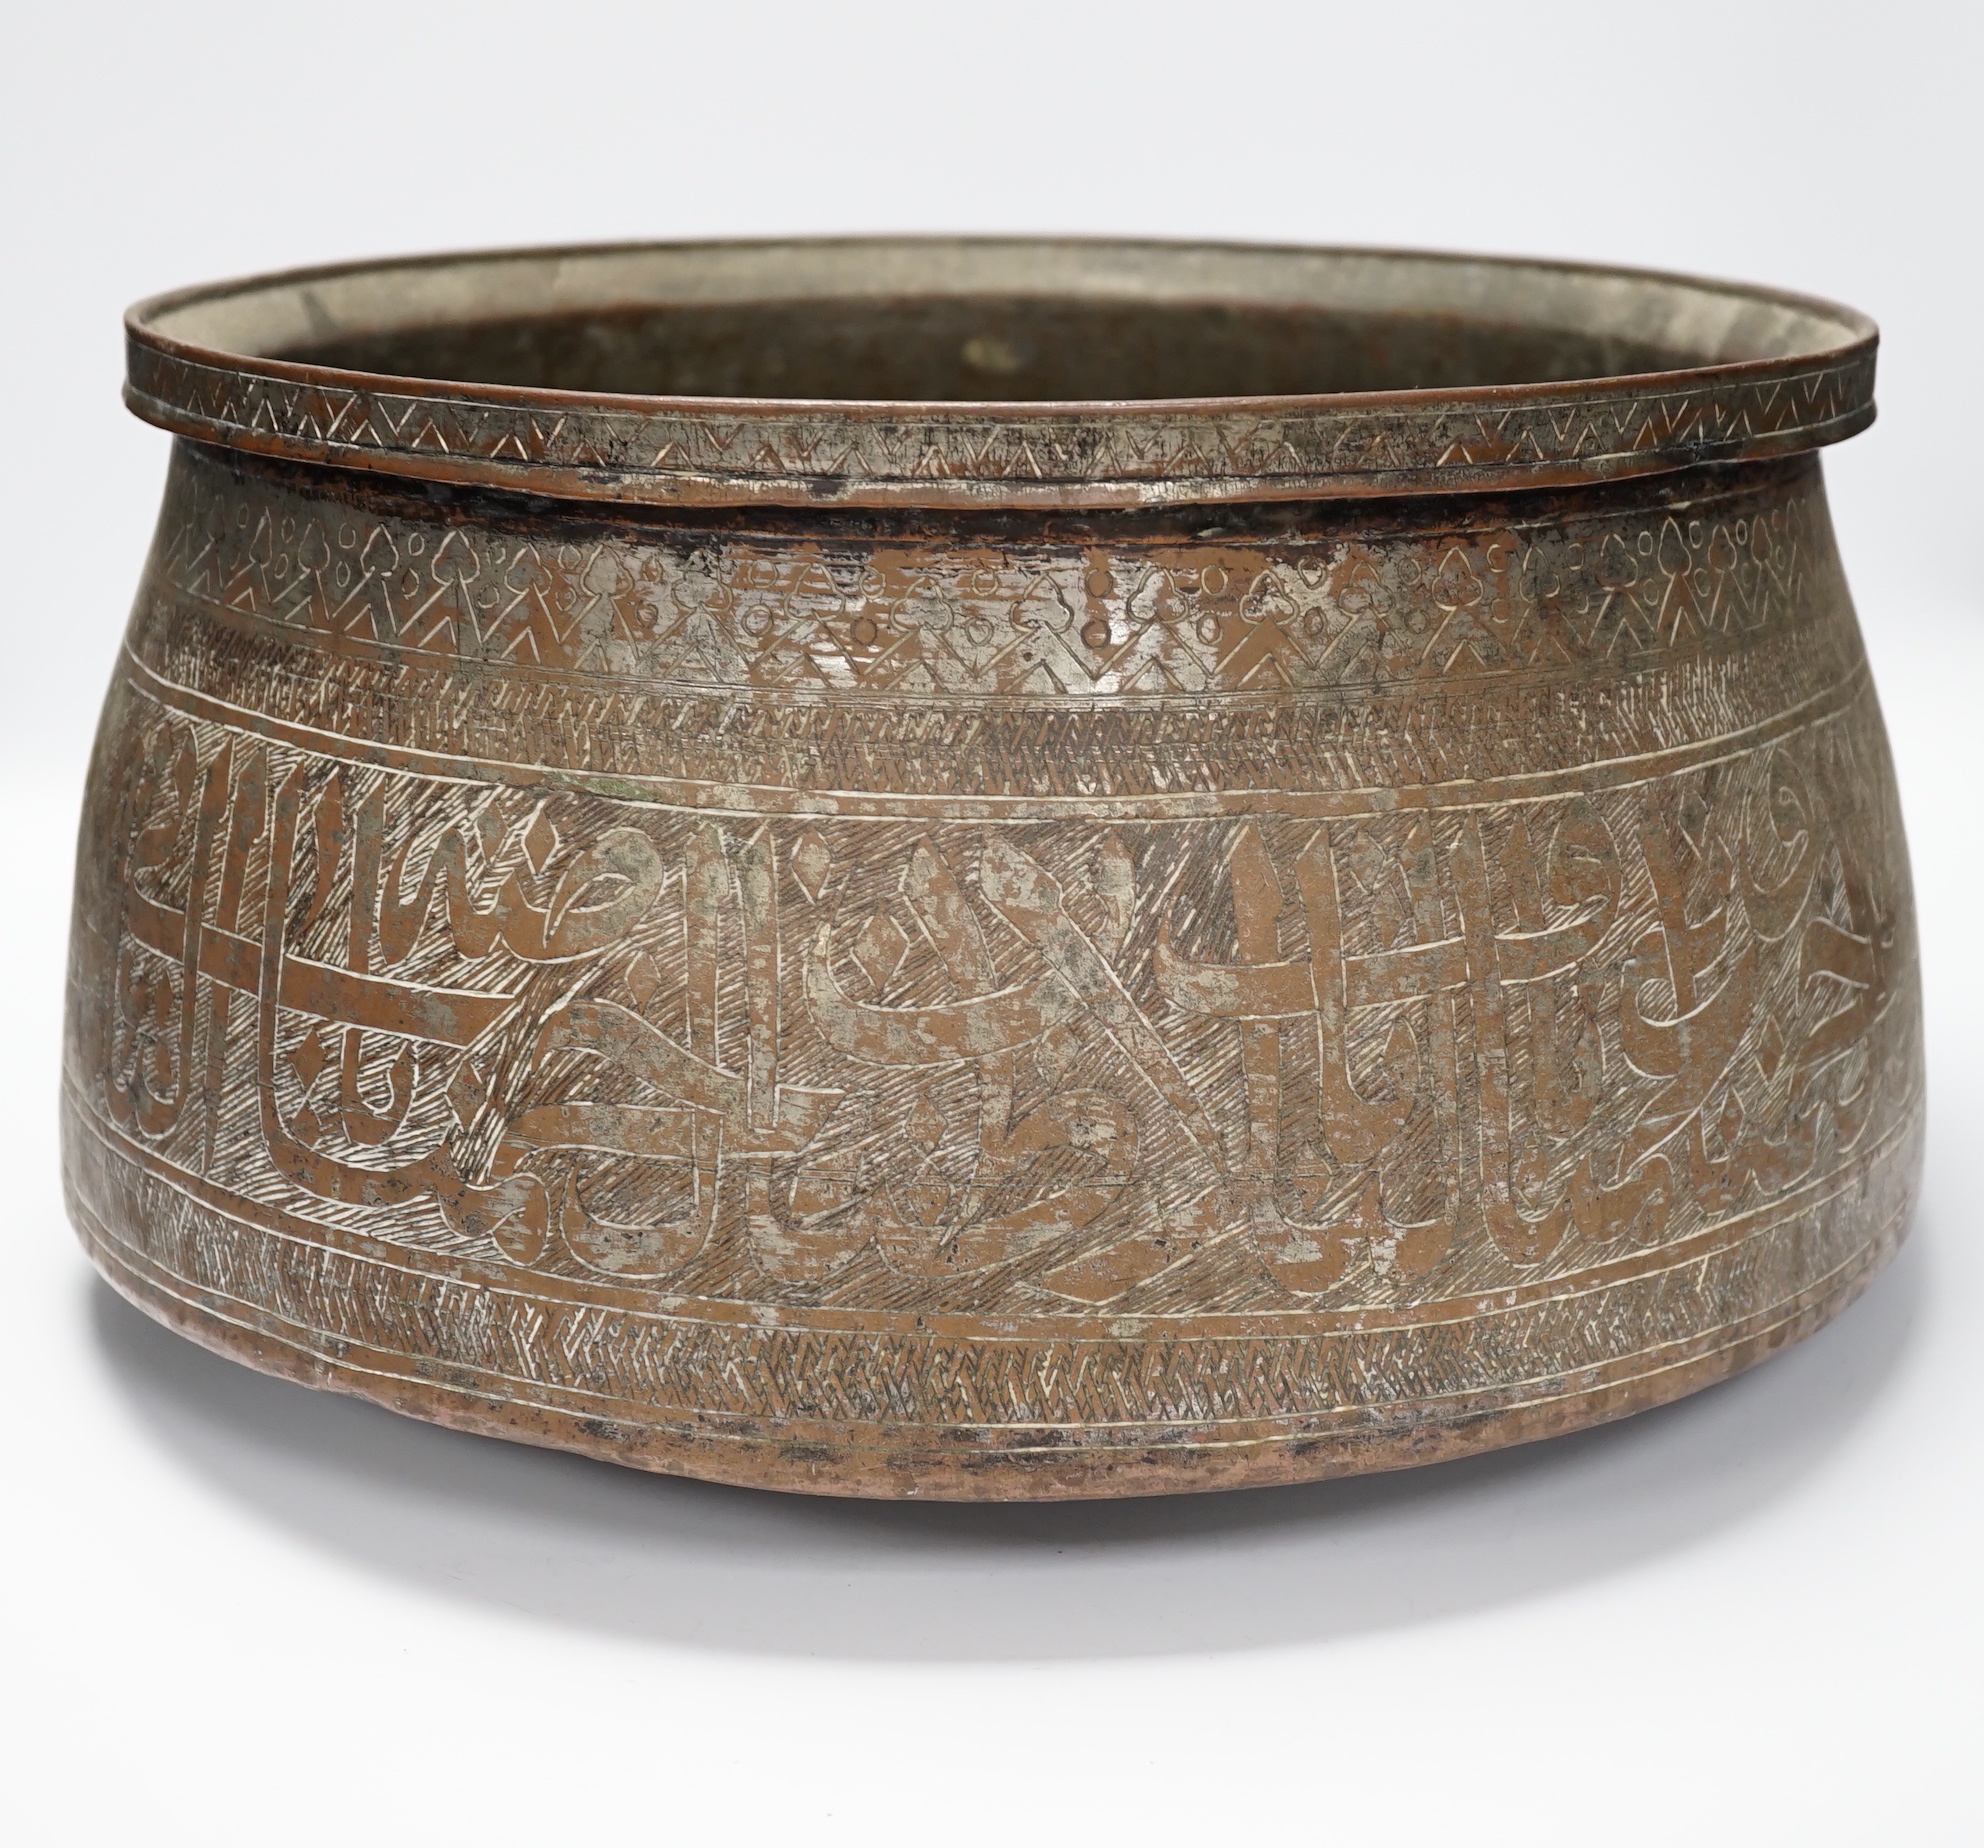 A large Islamic tinned copper bowl, inscribed in Kufic script, 38cm diameter